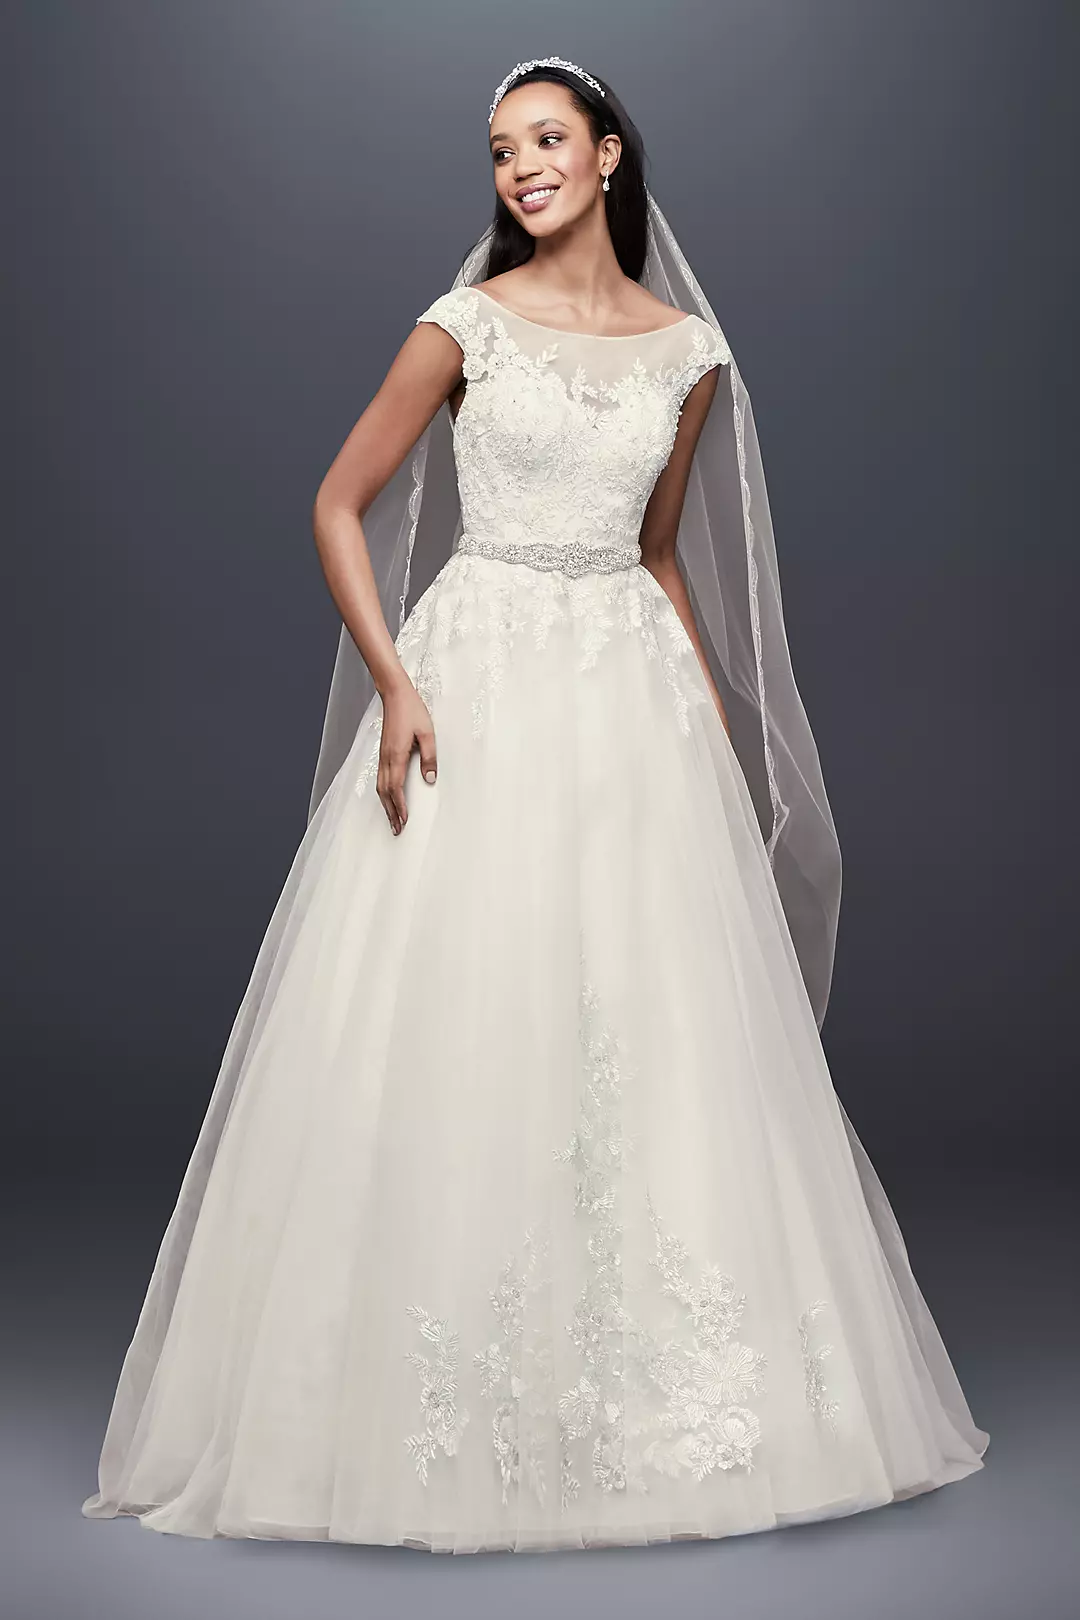 Tulle and Lace Cap Sleeve A-Line Wedding Dress Image